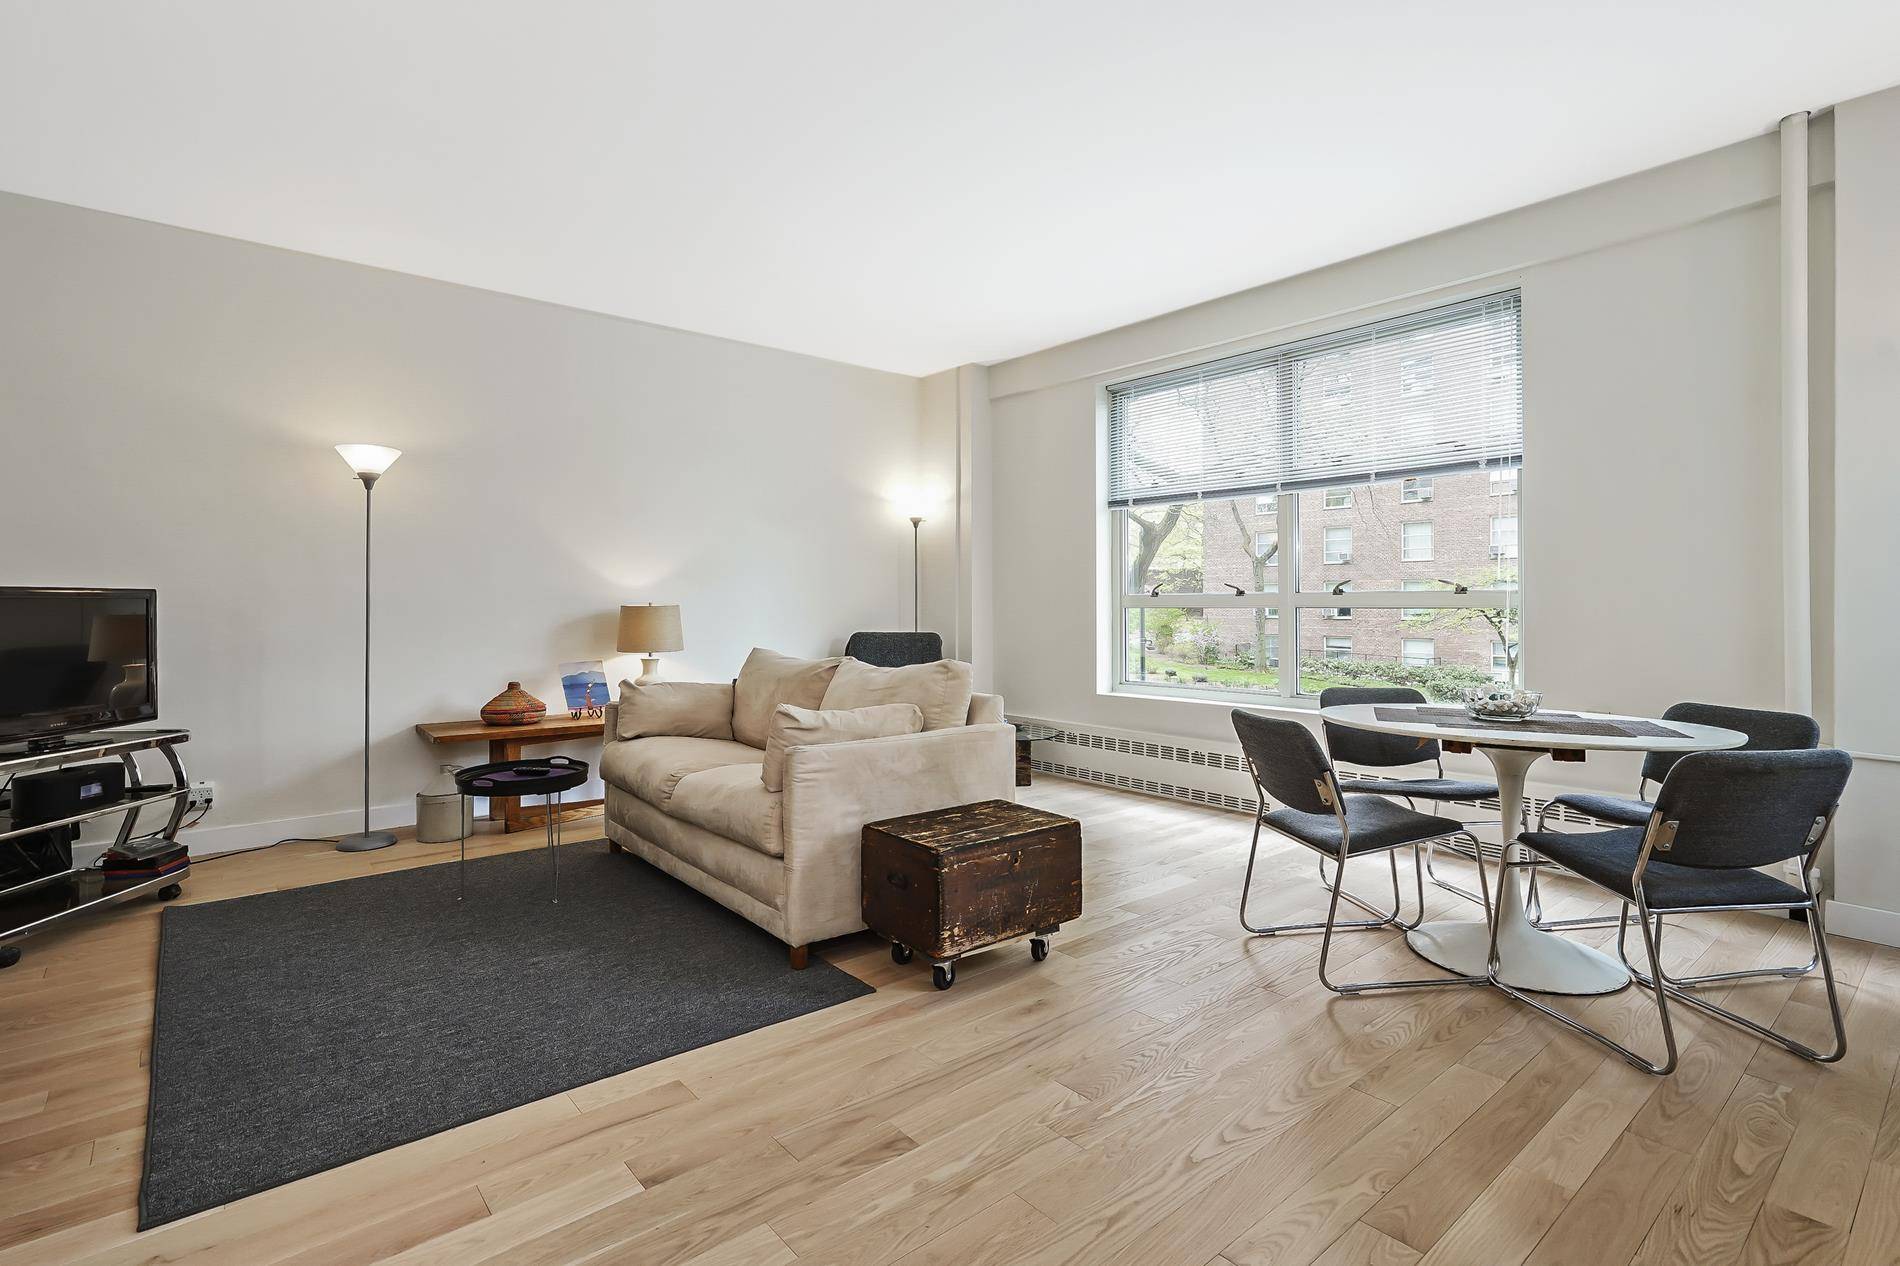 This bright and sunny 2 bed 1 bath co op in Morningside Gardens features brand new solid oak hardwood floors, 9 ft ceilings, oversized windows and 9 spacious closets.